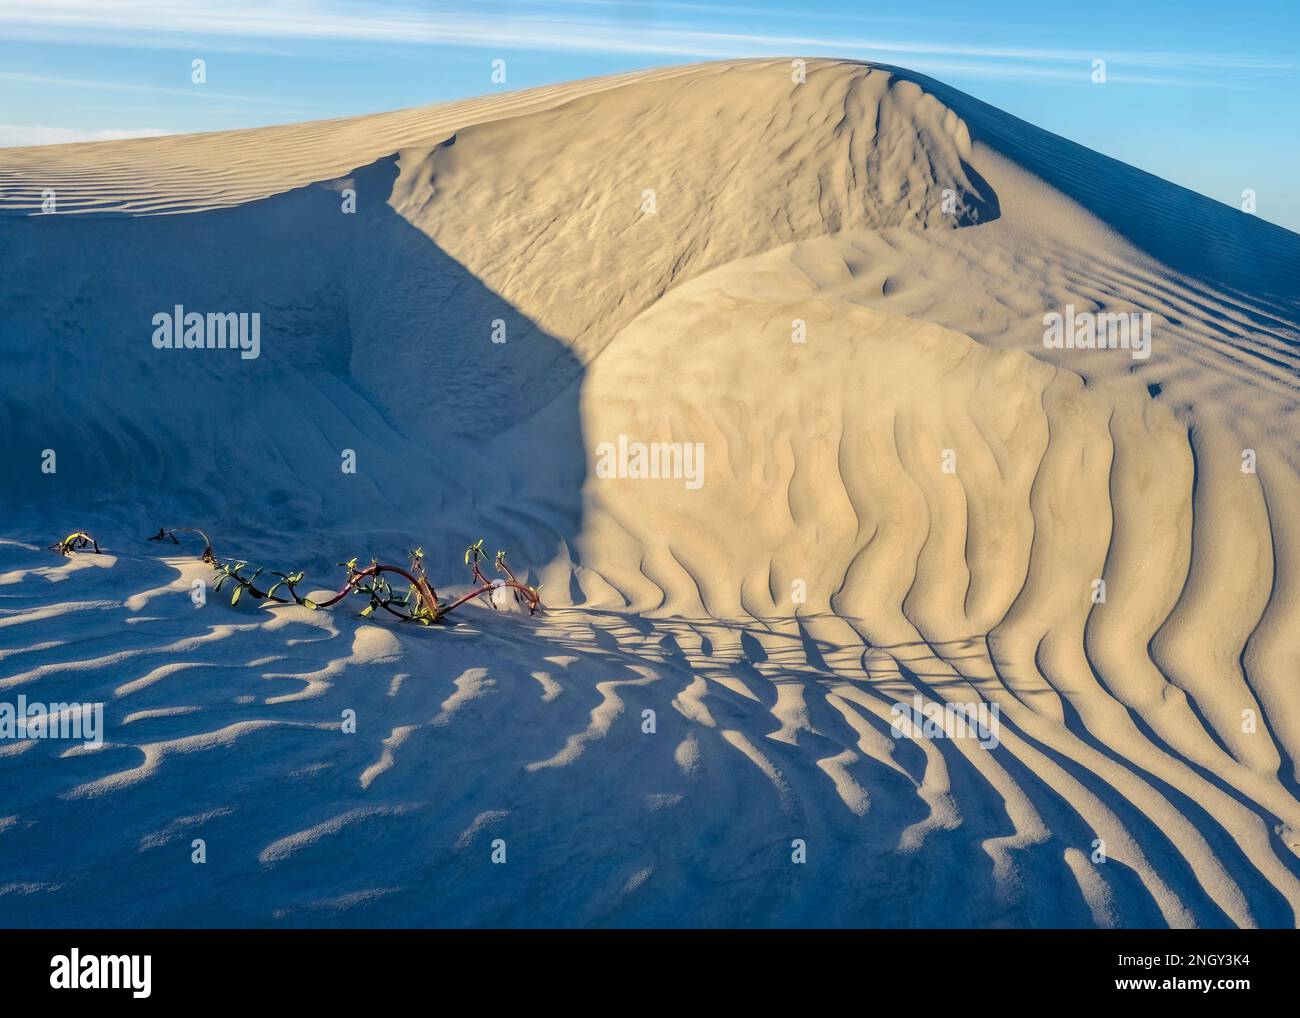 Patterns in the dunes at Sand Dollar Beach, Magdalena Island, Baja California Sur, Mexico, North America Stock Photo